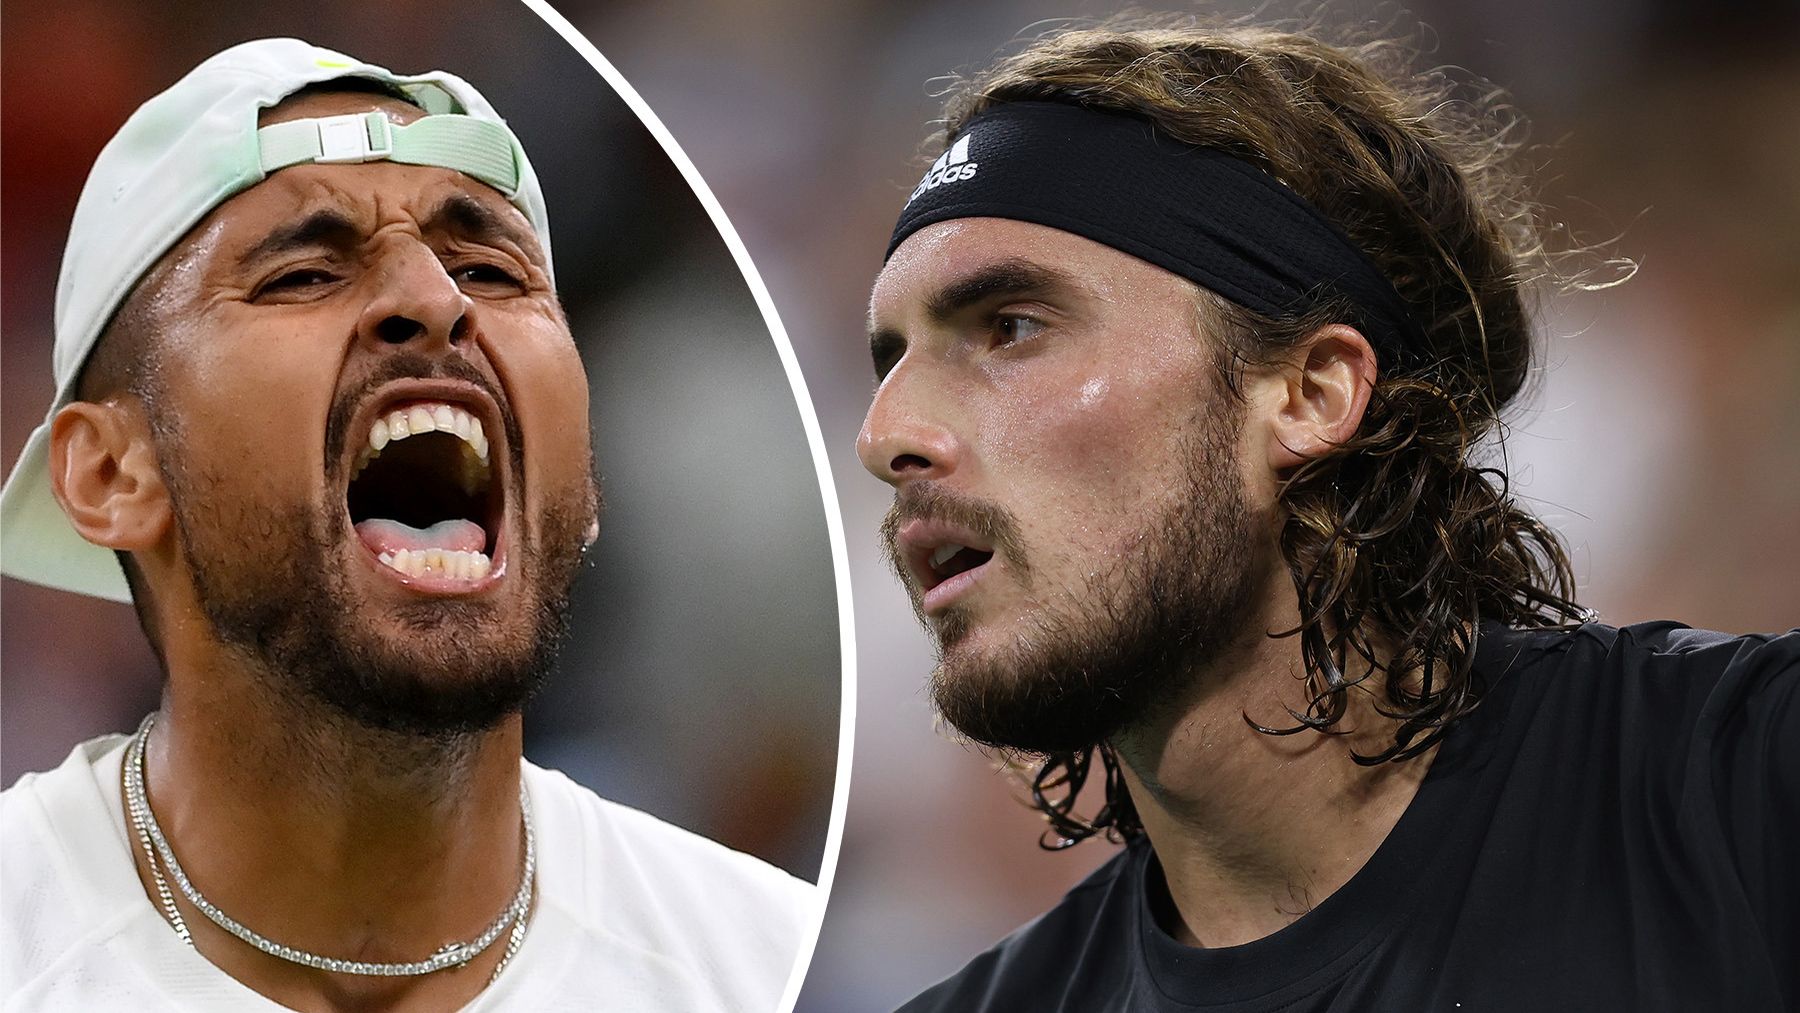 'Got taught a lesson': Nick Kyrgios reignites feud with Stefanos Tsitsipas